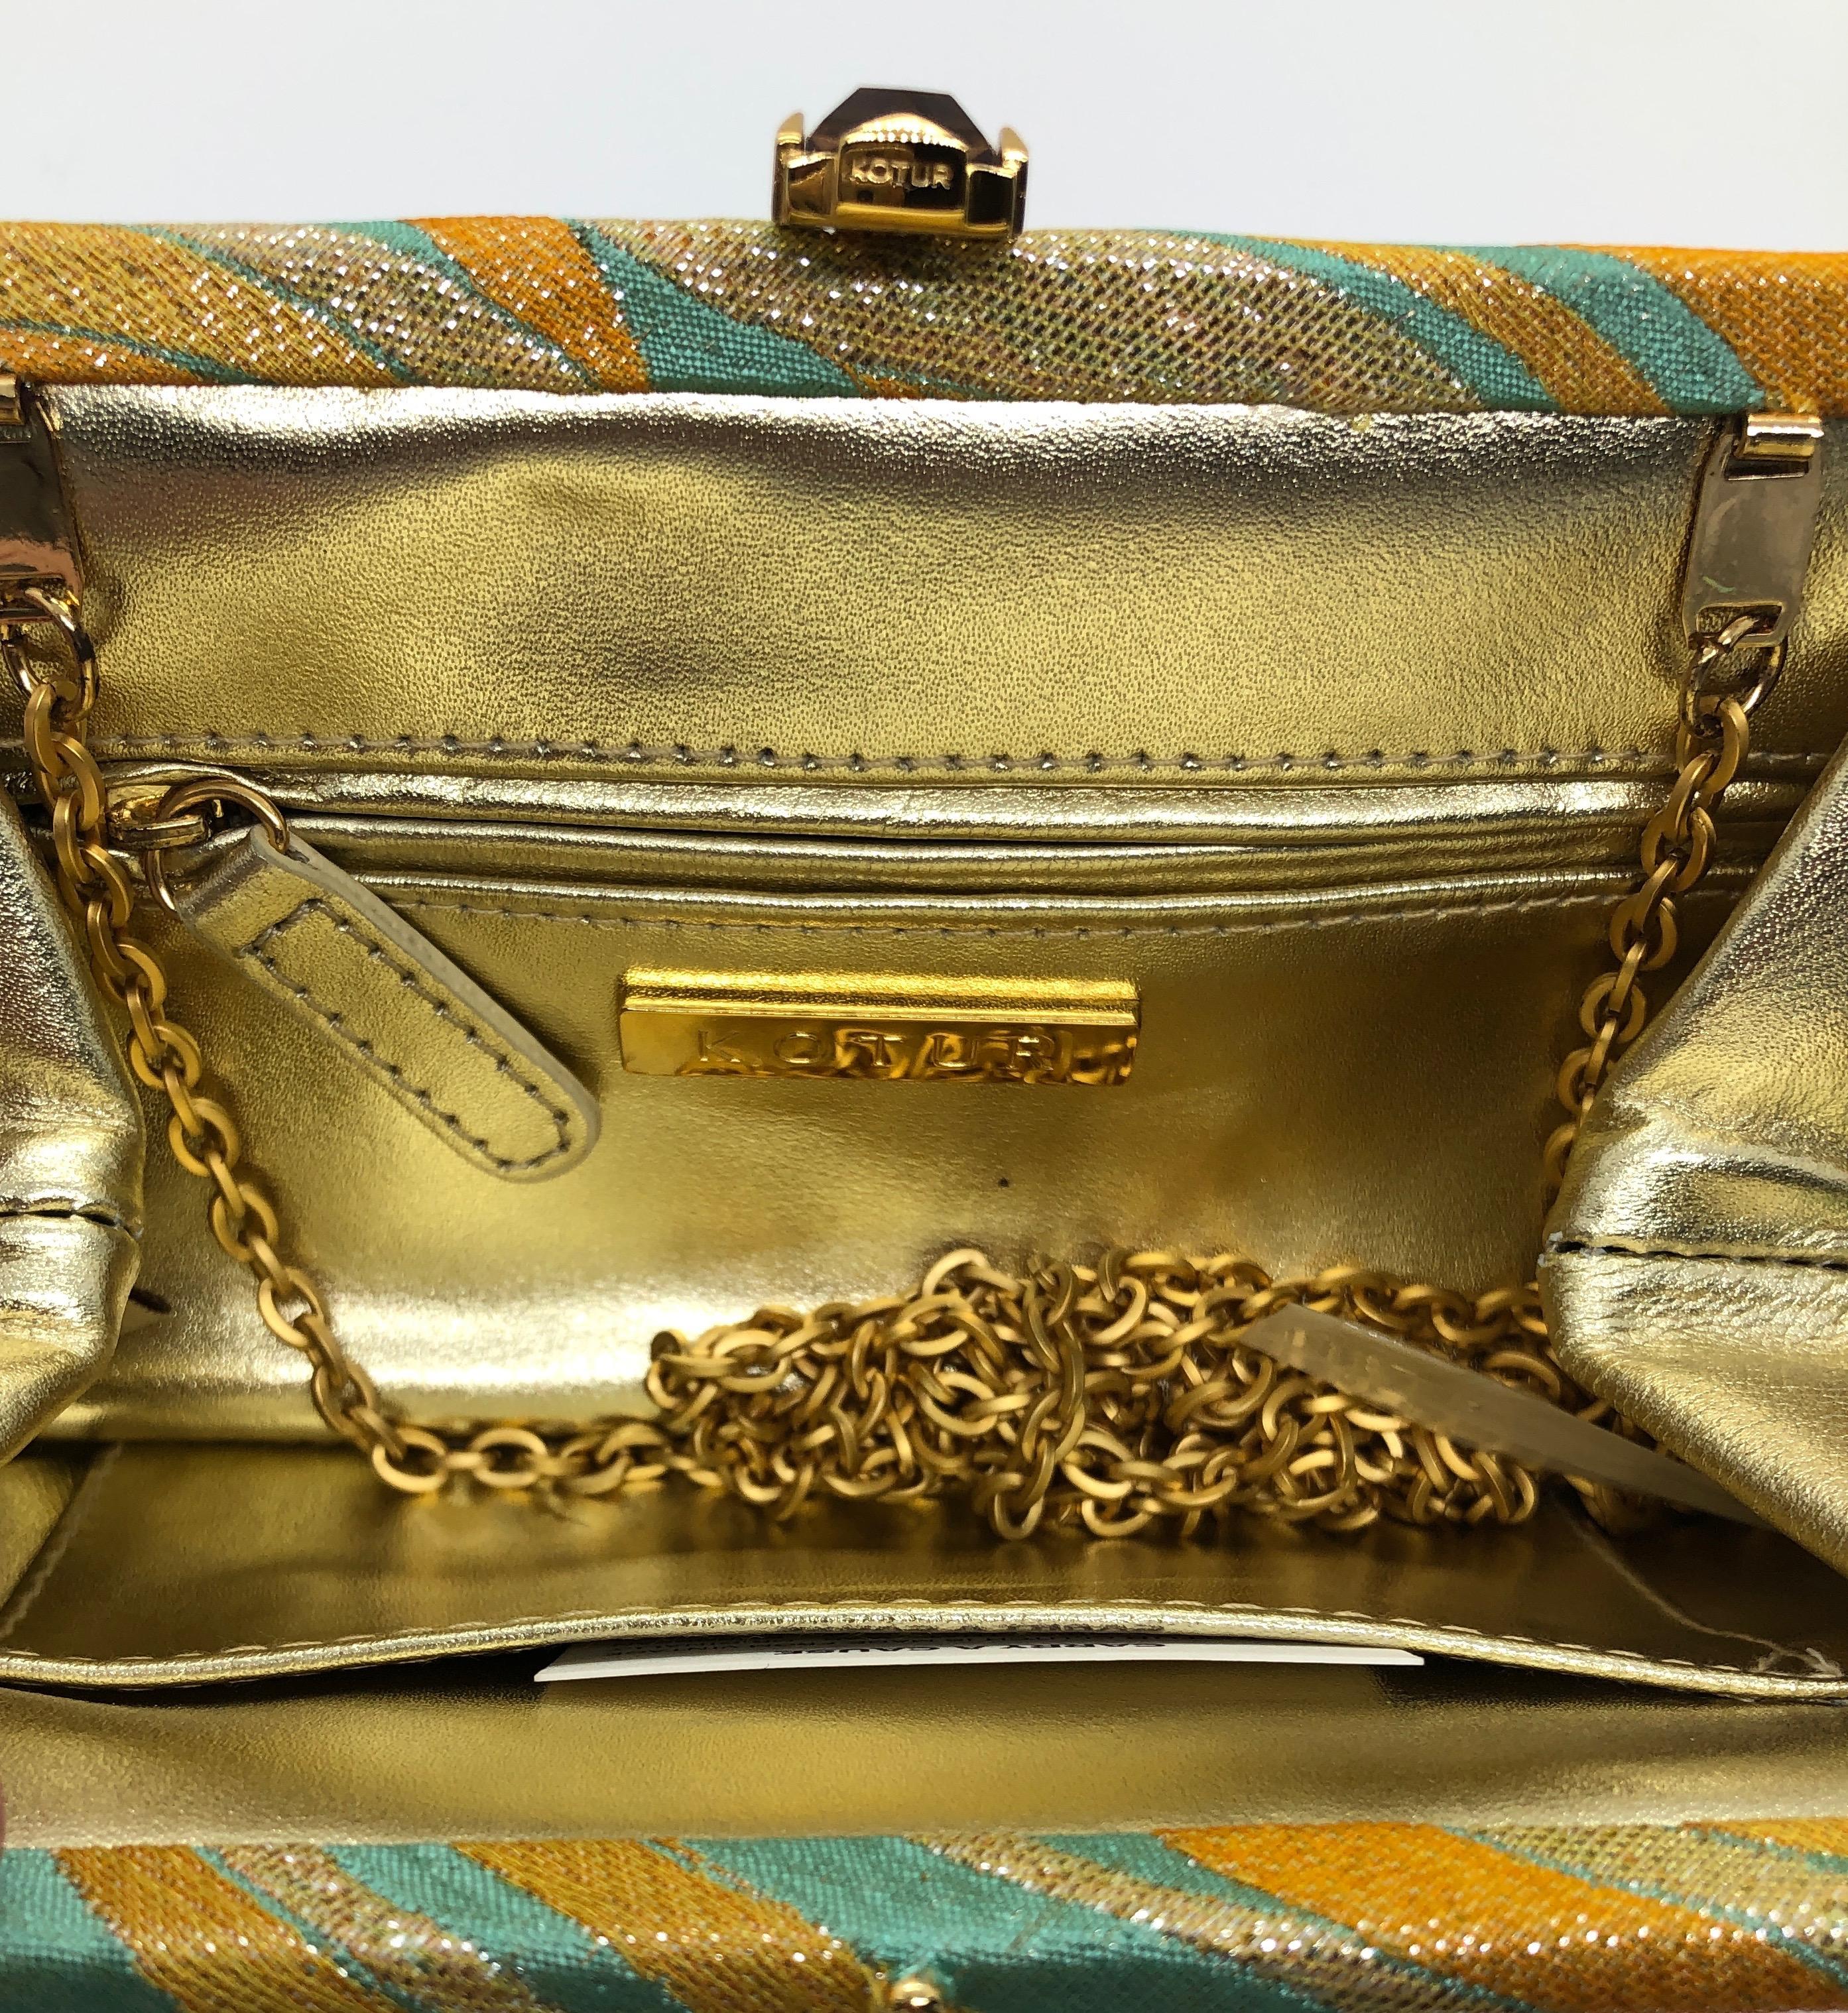 Kotur Metallic Yellow, Gold & Turquoise Silk w/ Gold Clasp & Chain Evening Bag For Sale 5